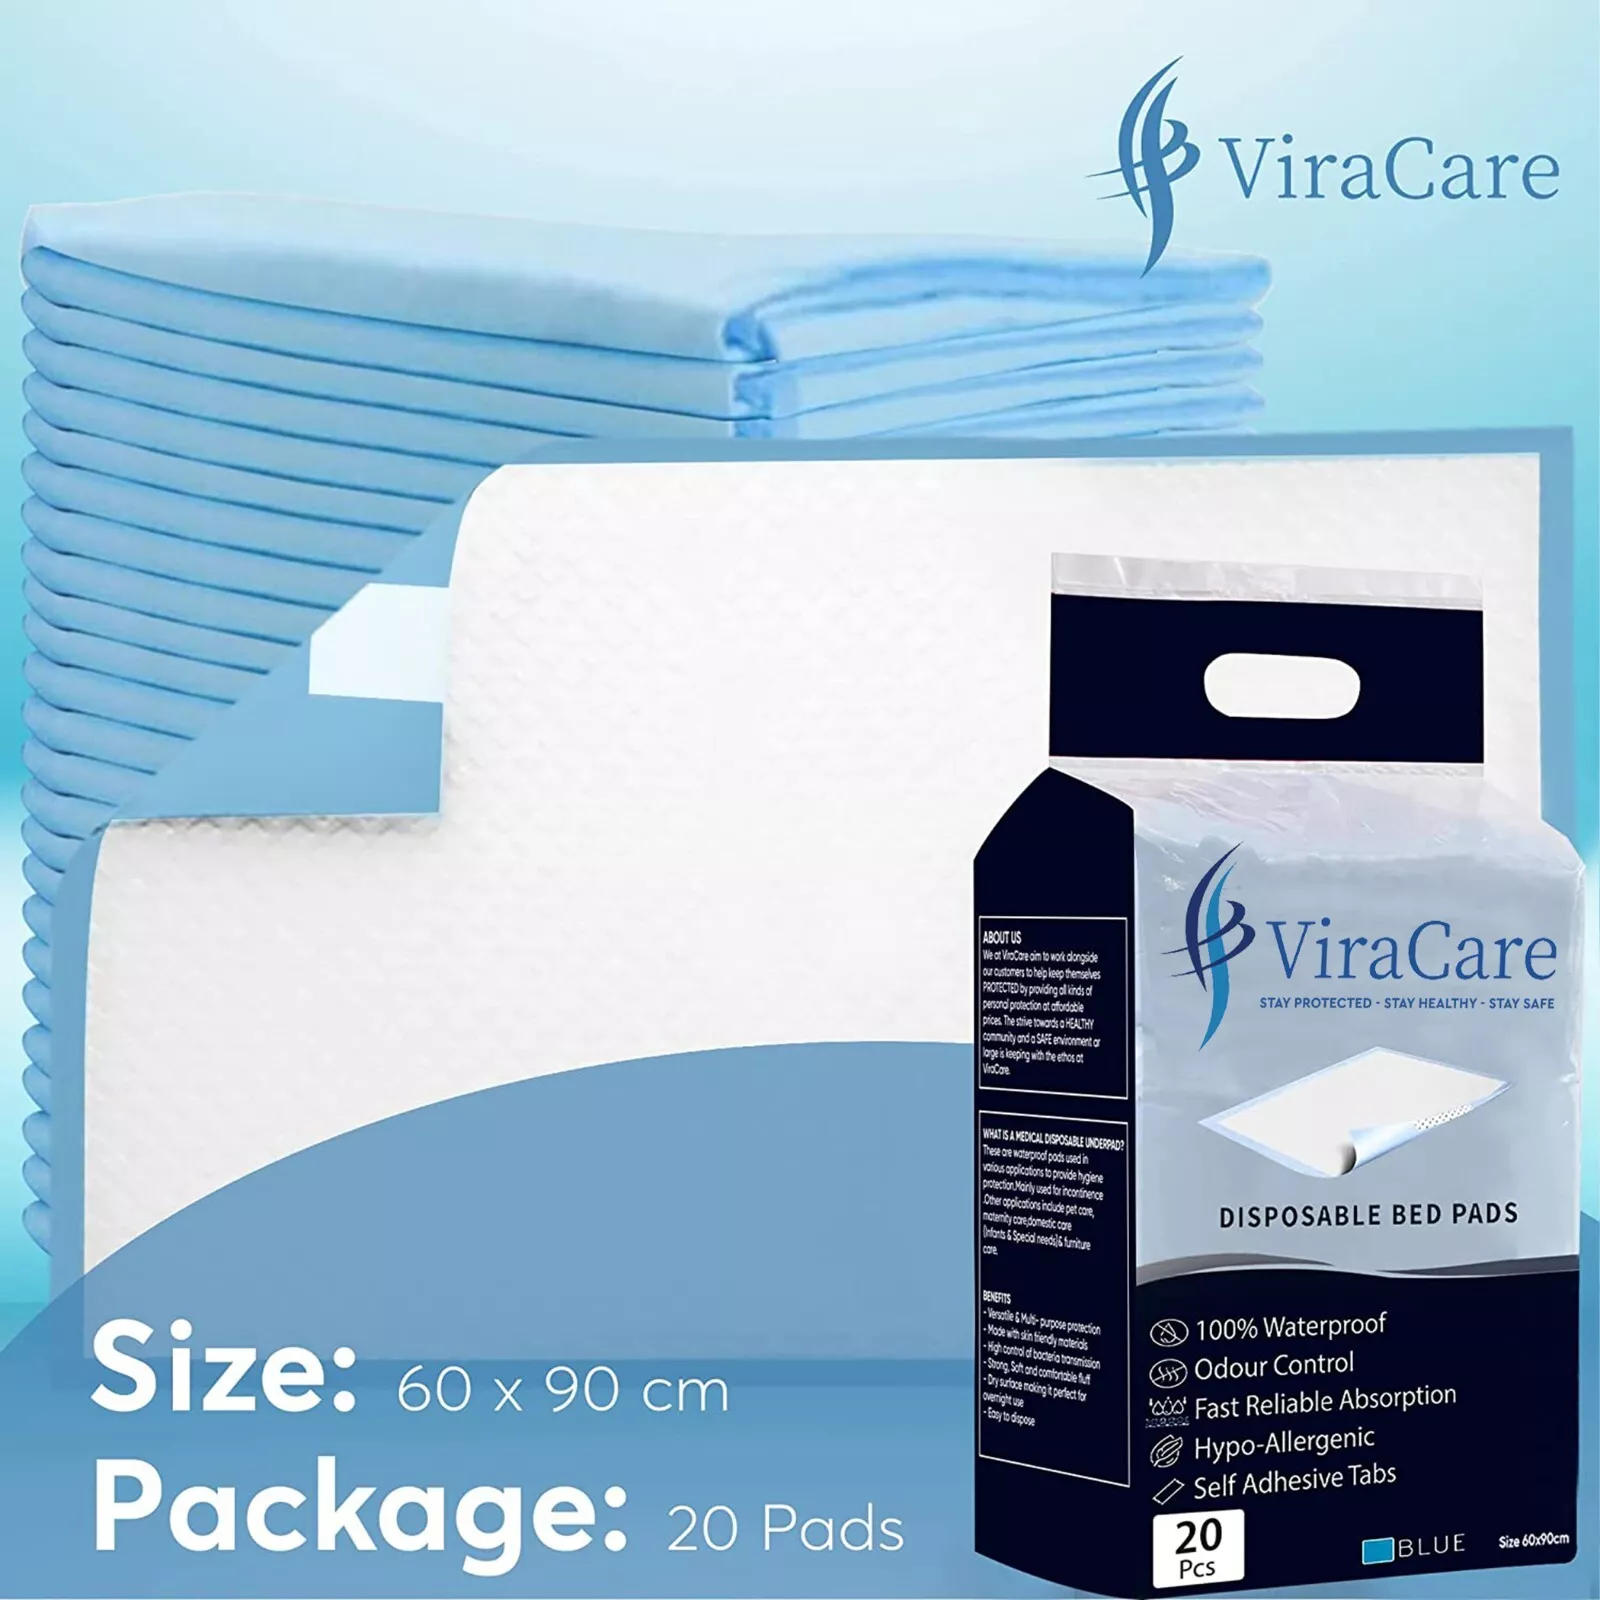 incontinence bed sheets, incontinence bed pads, urinary incontinence bed pads, bladder pads for beds